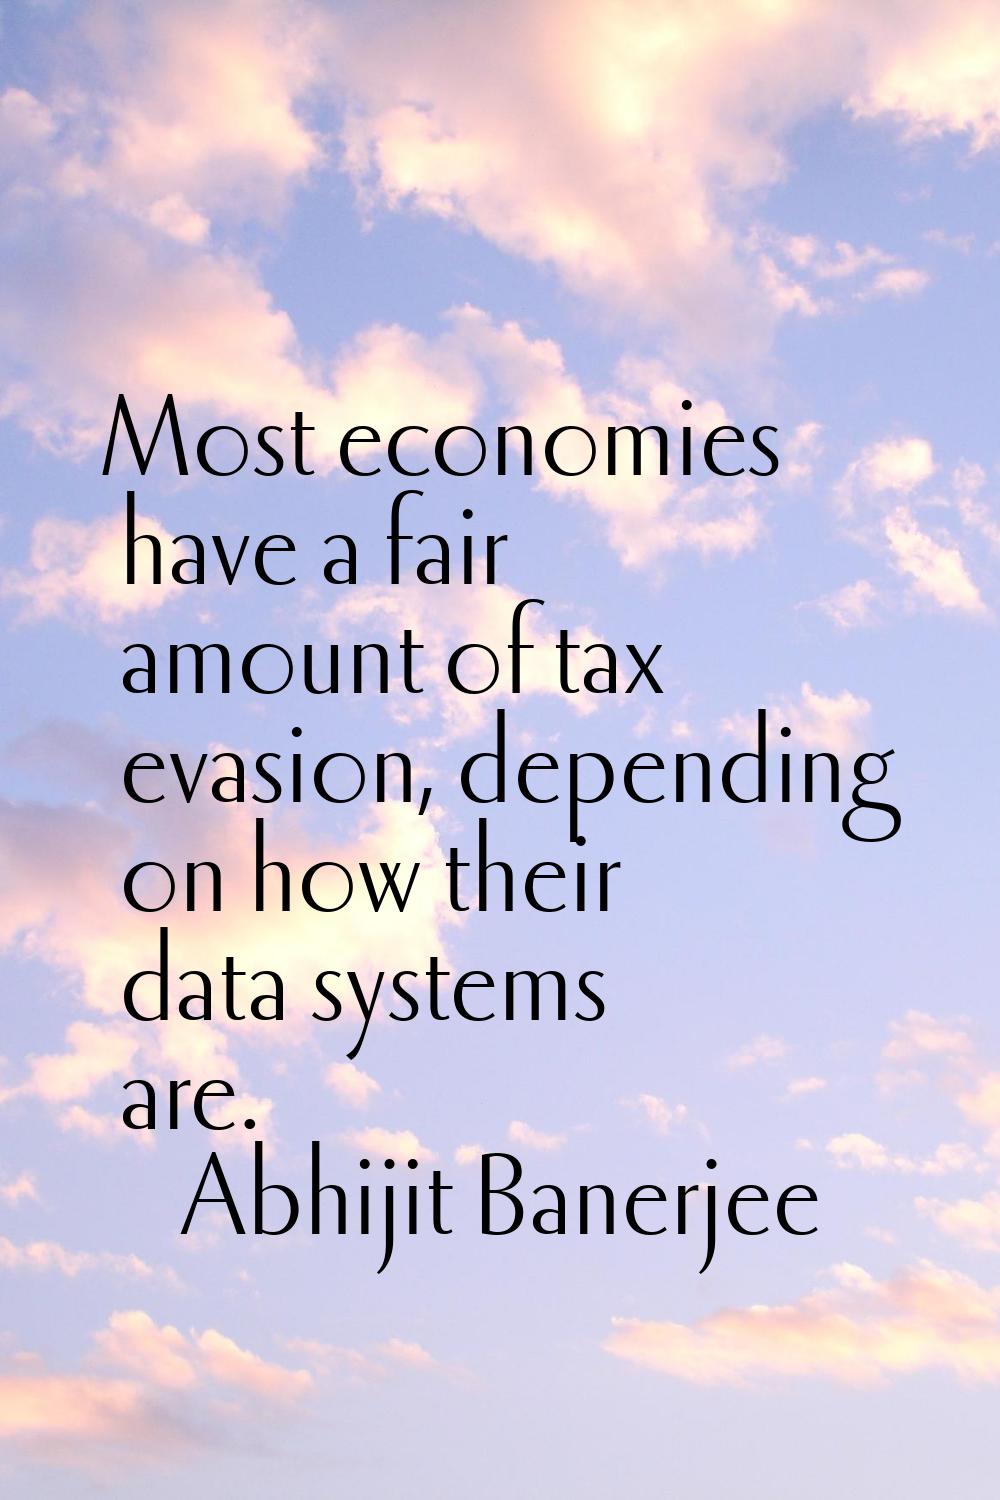 Most economies have a fair amount of tax evasion, depending on how their data systems are.